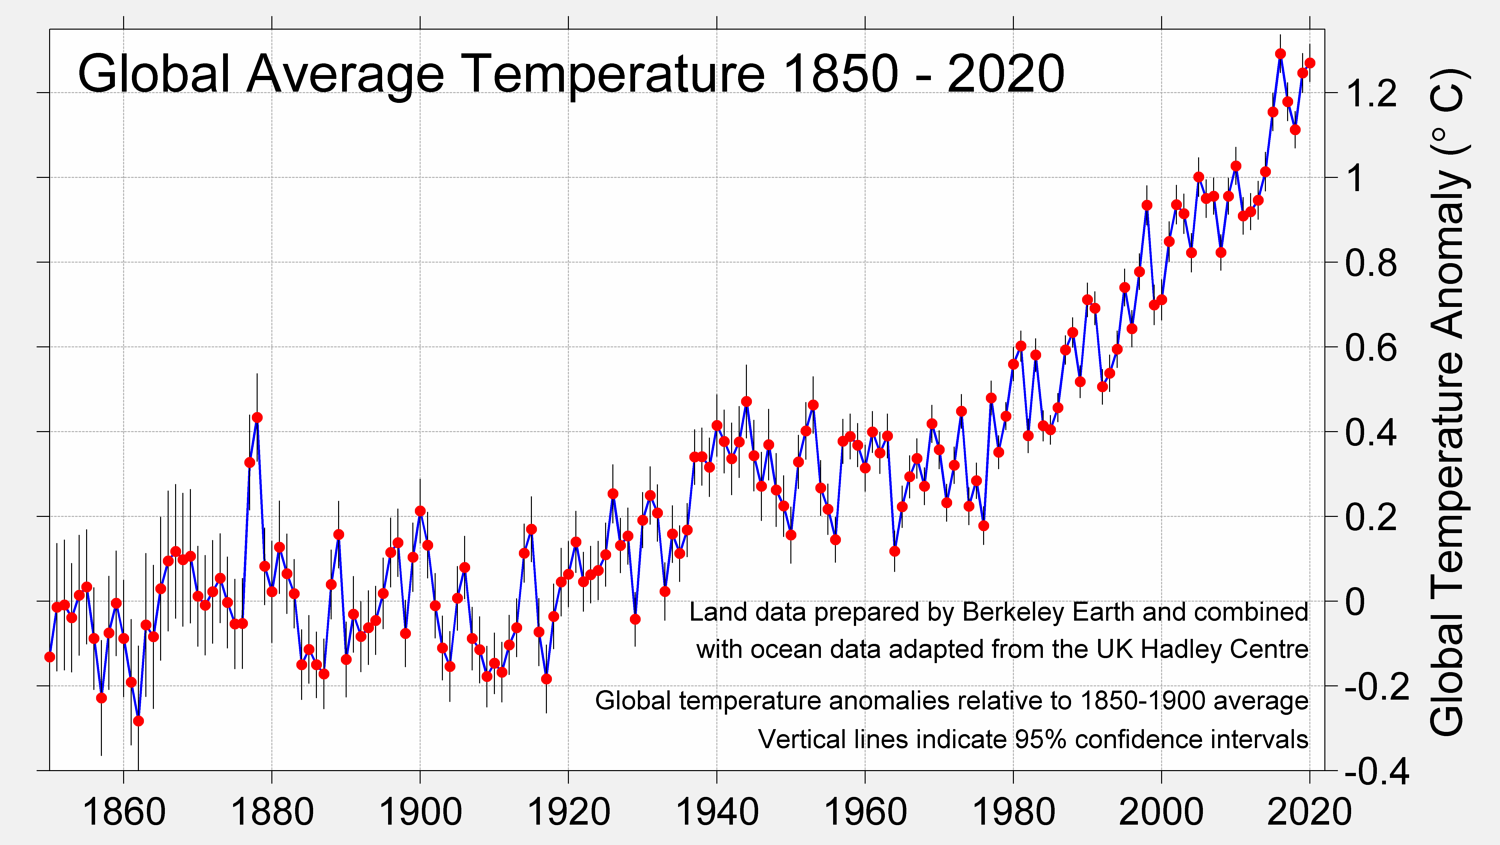 A graph shows the rise in global average temperature from 1850-2020 which starts at less than zero in 1960, shows a rapid increase from 0.1 in 1930 to 0.4 in 1950, then another rapid rise from 0.4 in 1980 to 1.2 in 2020. 